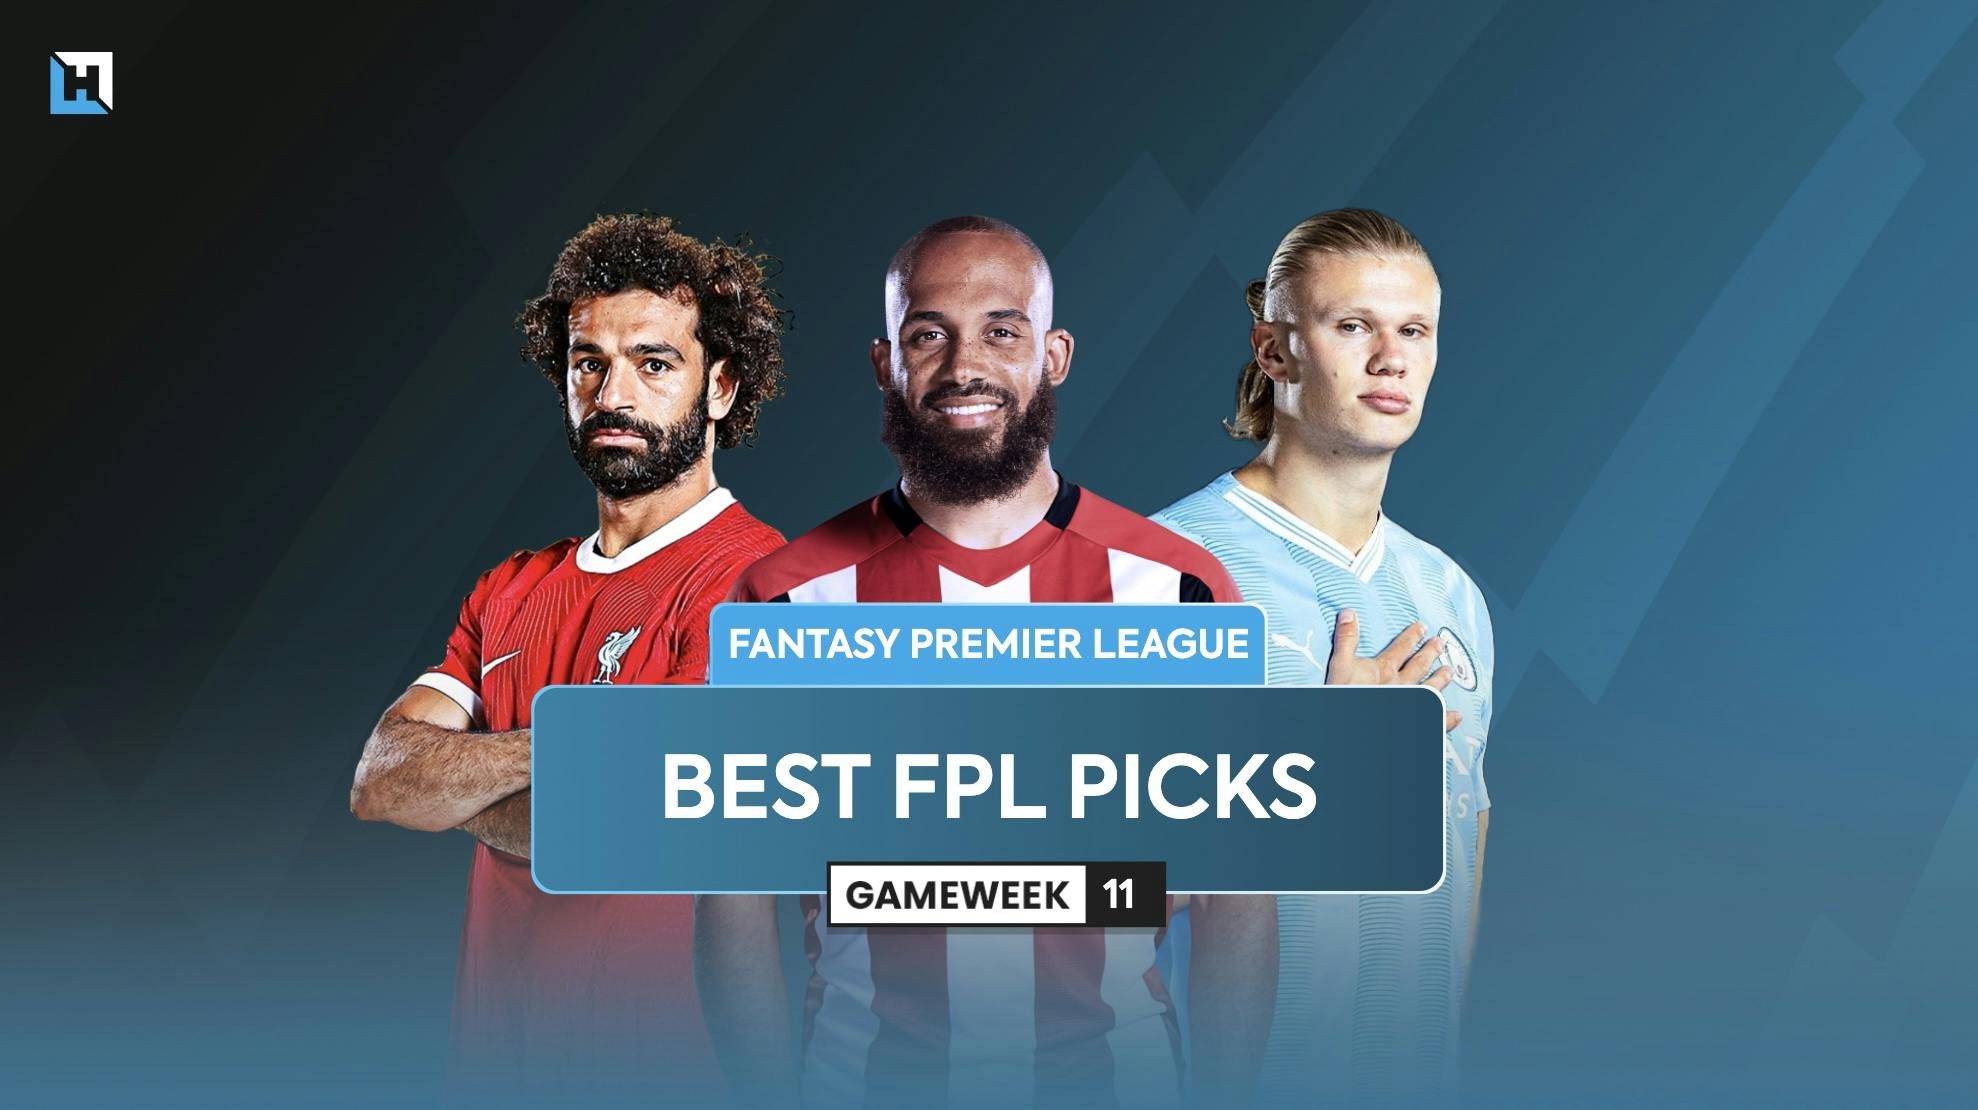 Best FPL players for Gameweek 11